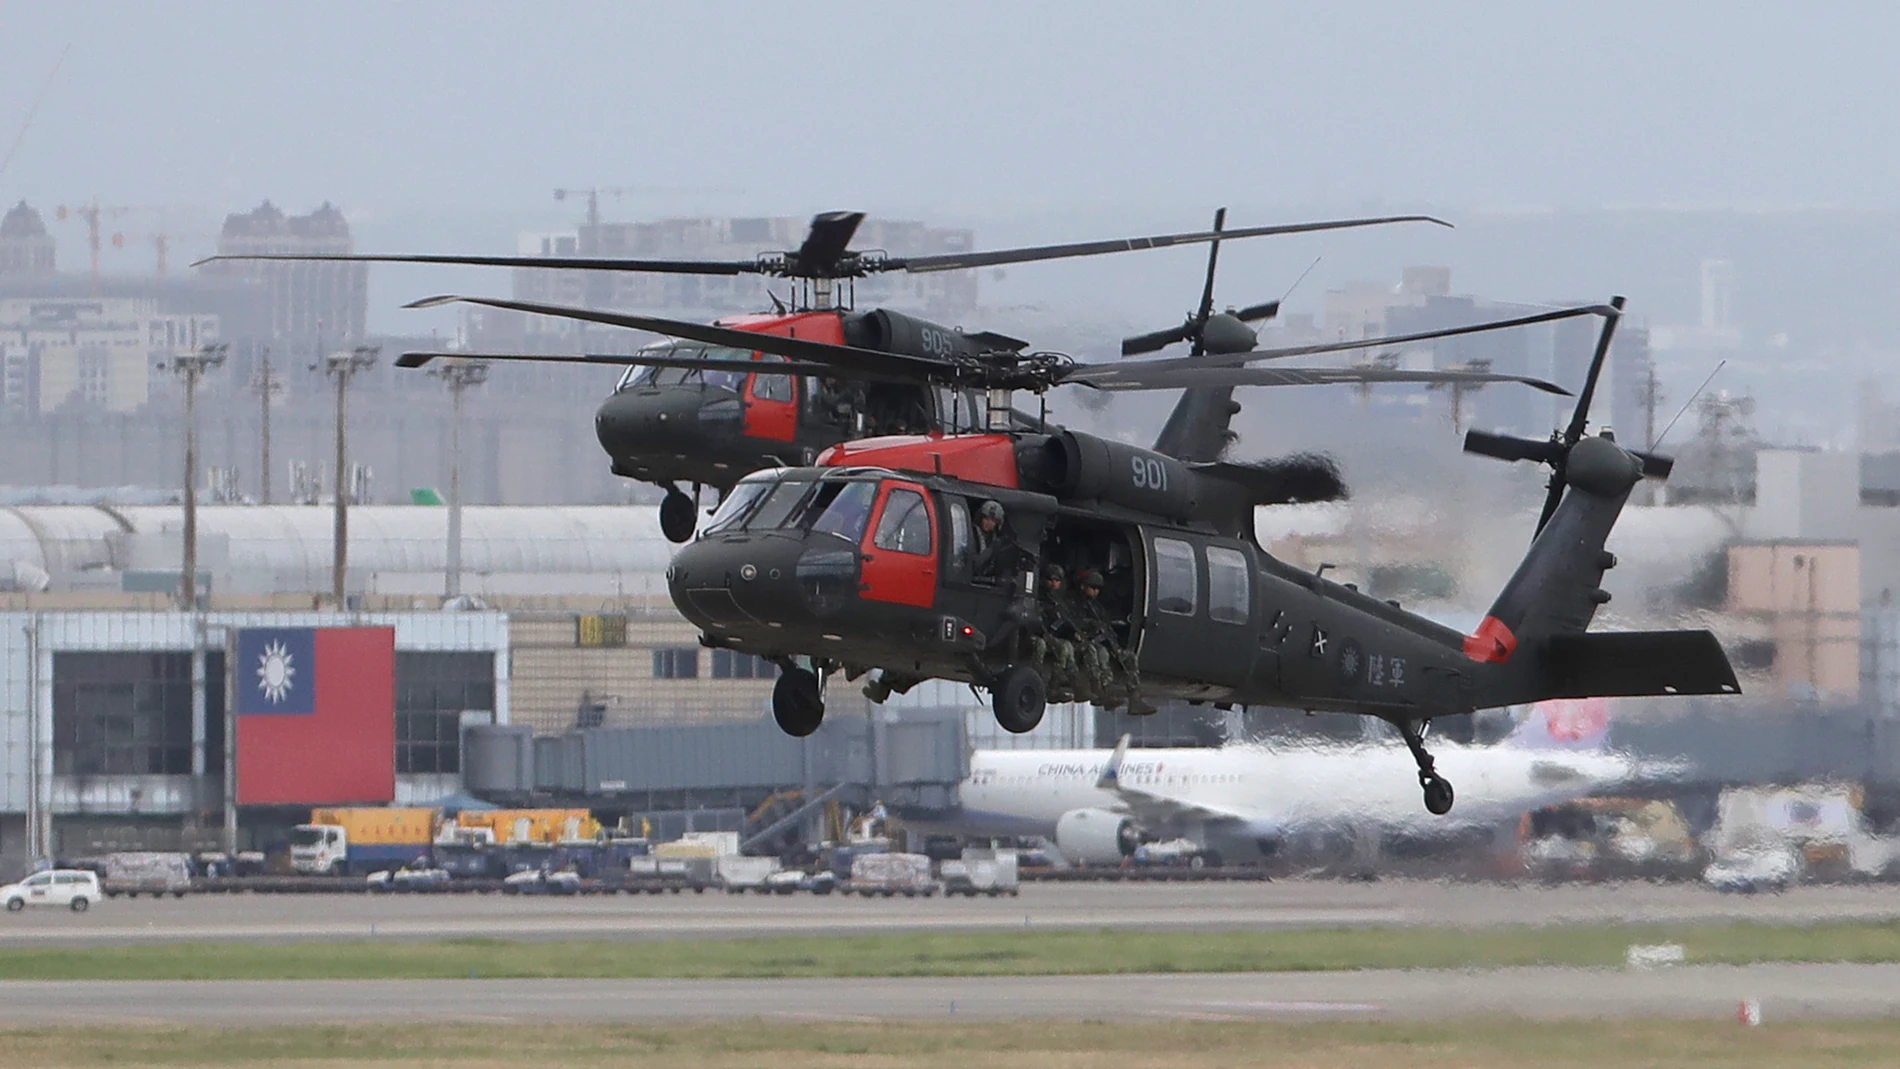 Two Sikorsky UH-60 "Black Hawk" helicopters approach during the annual Han Kuang military exercises that simulates an attack on an airfield at Taoyuan International Airport in Taoyuan, northern Taiwan, Wednesday, July 26, 2023. Taiwan military mobilized for routine defense exercises from July 24-28. (AP Photo/ Chiang Ying-ying)